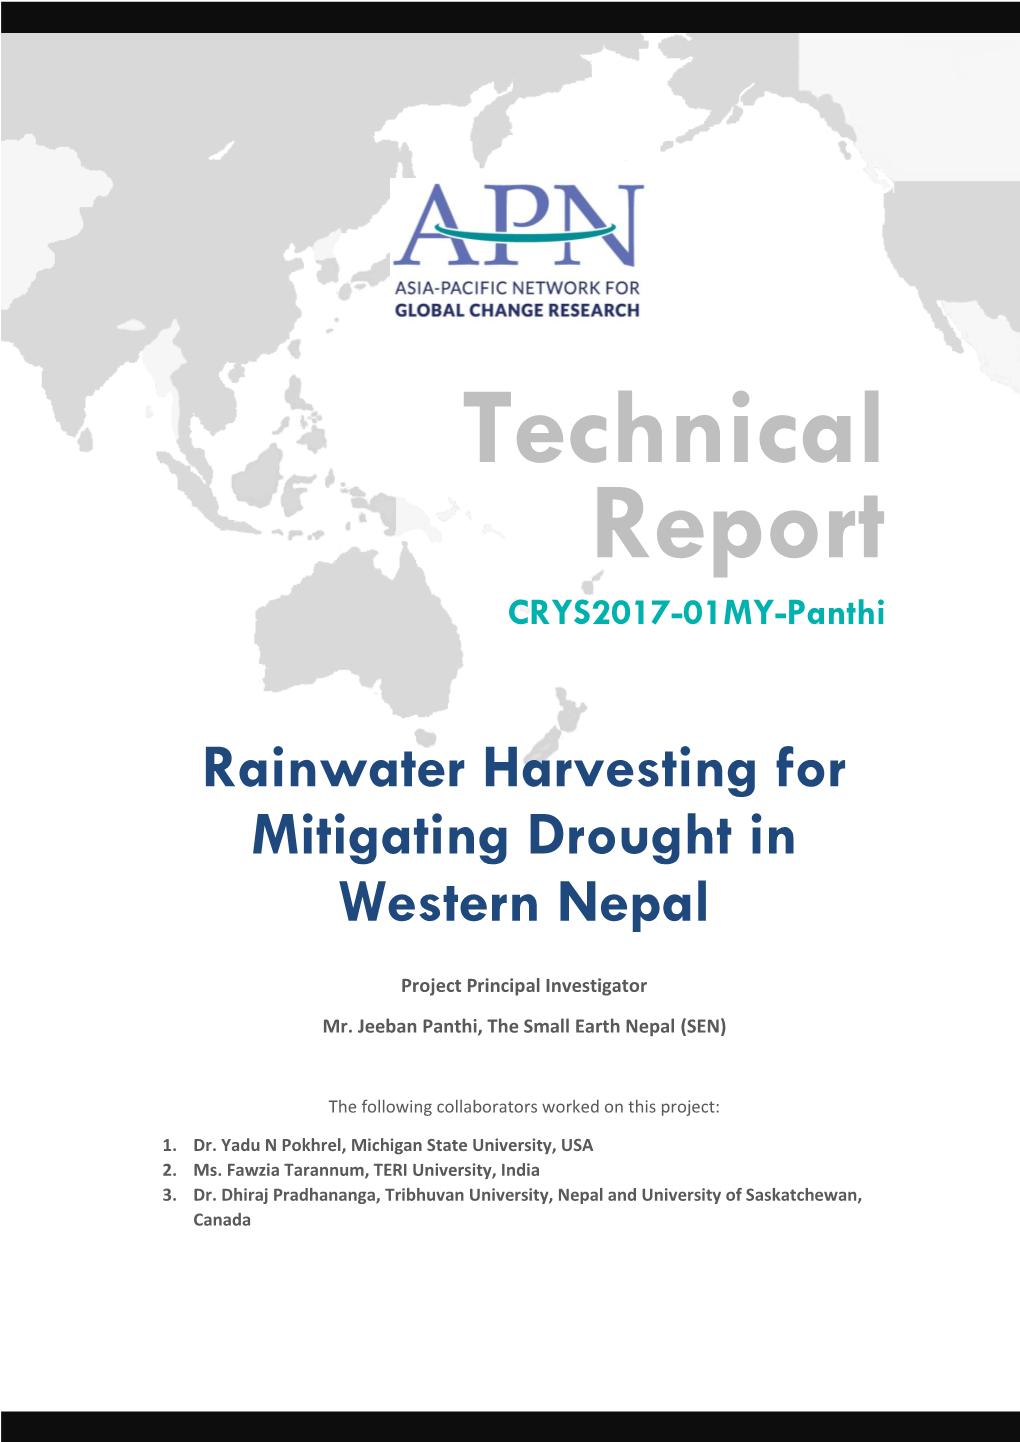 Rainwater Harvesting for Mitigating Drought in Western Nepal